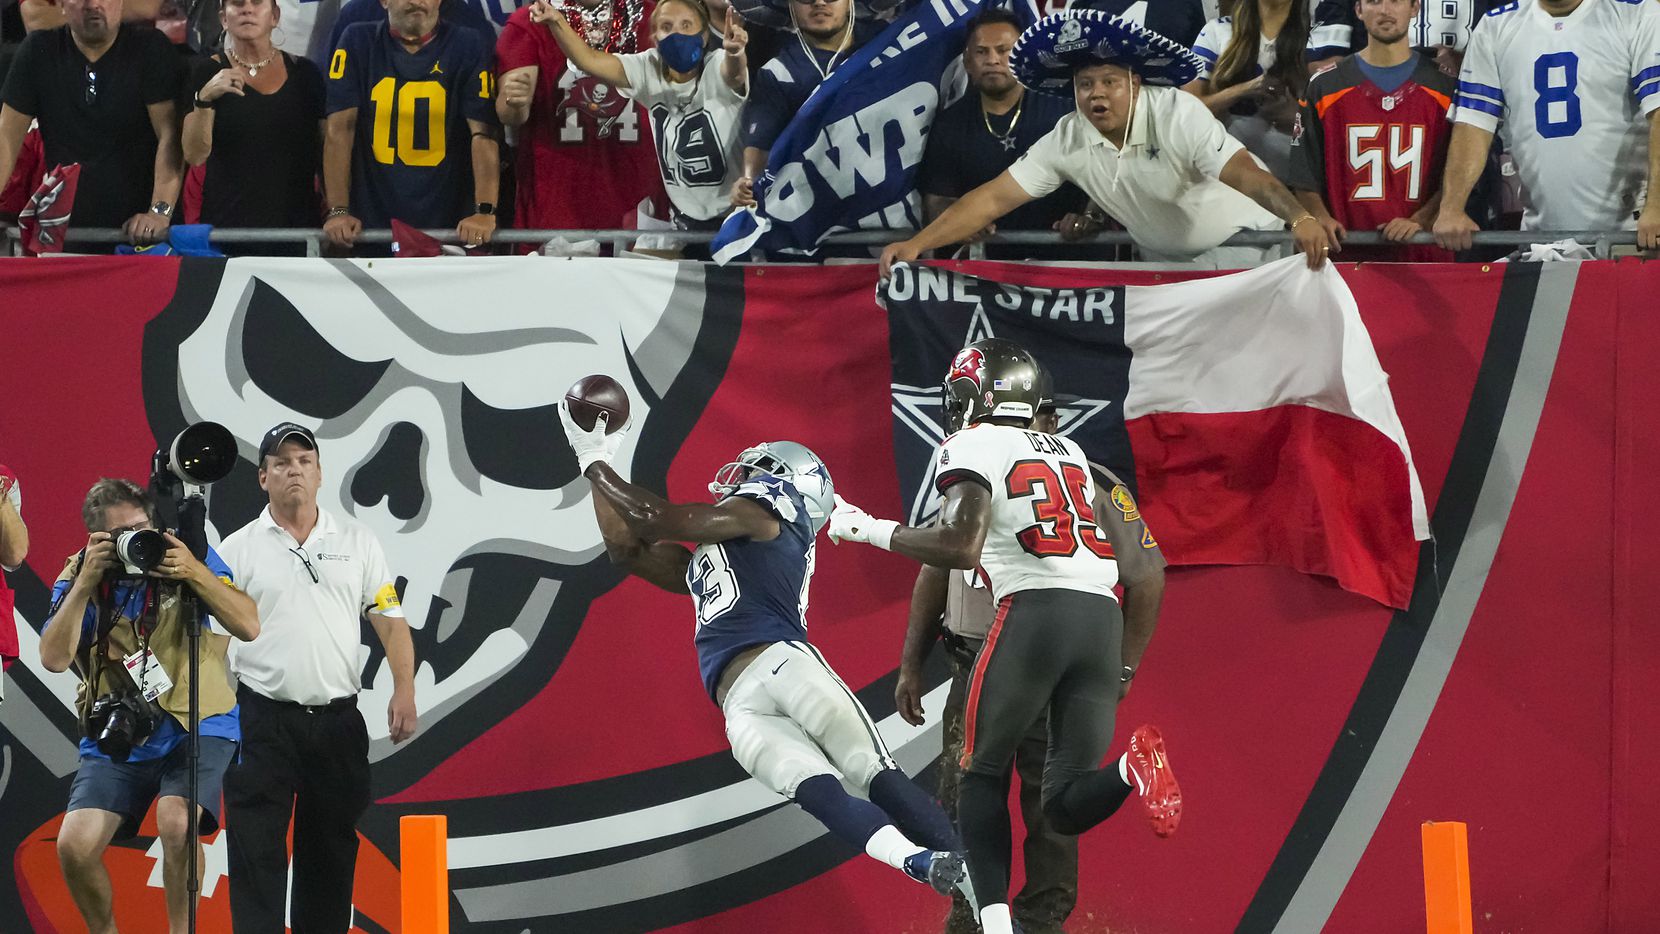 Dallas Cowboys wide receiver Michael Gallup (13) can’t make a catch in the end zone as Tampa Bay Buccaneers cornerback Jamel Dean (35) defends during the first half of an NFL football game at Raymond James Stadium on Thursday, Sept. 9, 2021, in Tampa, Fla.